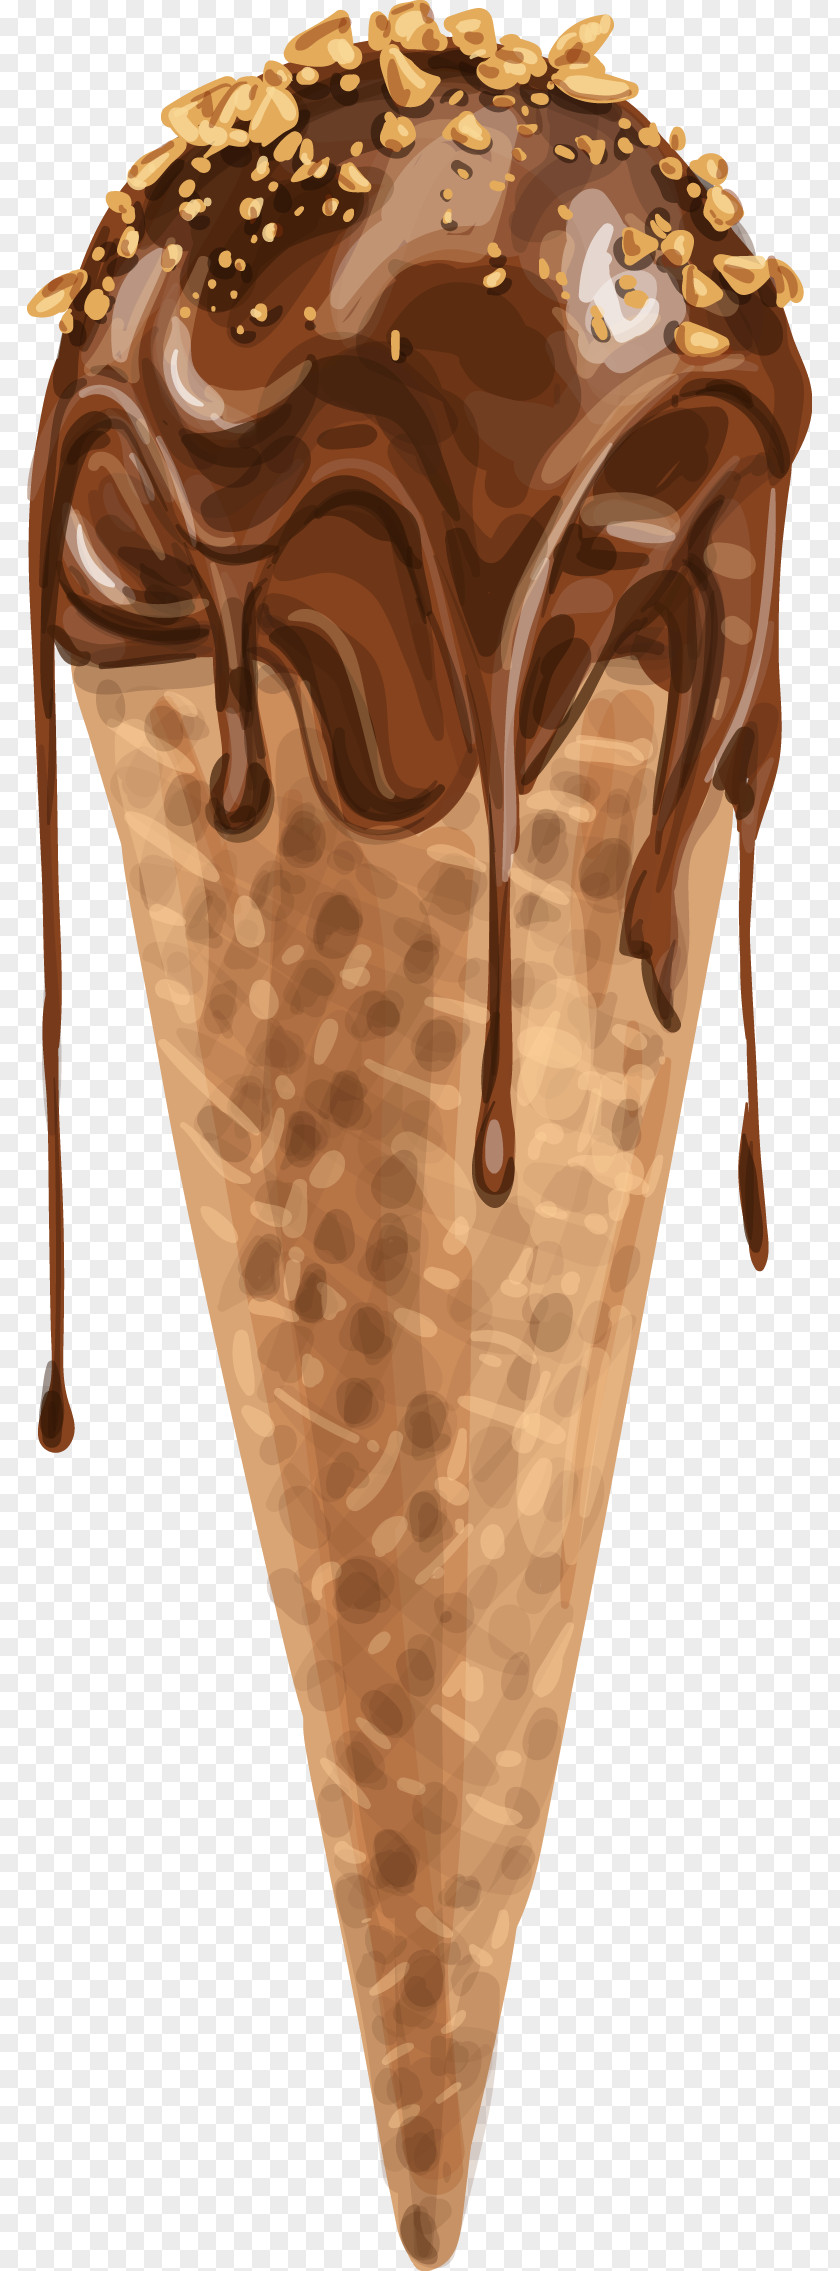 Vector Hand Painted Chocolate Cone Ice Cream Pop Doughnut PNG